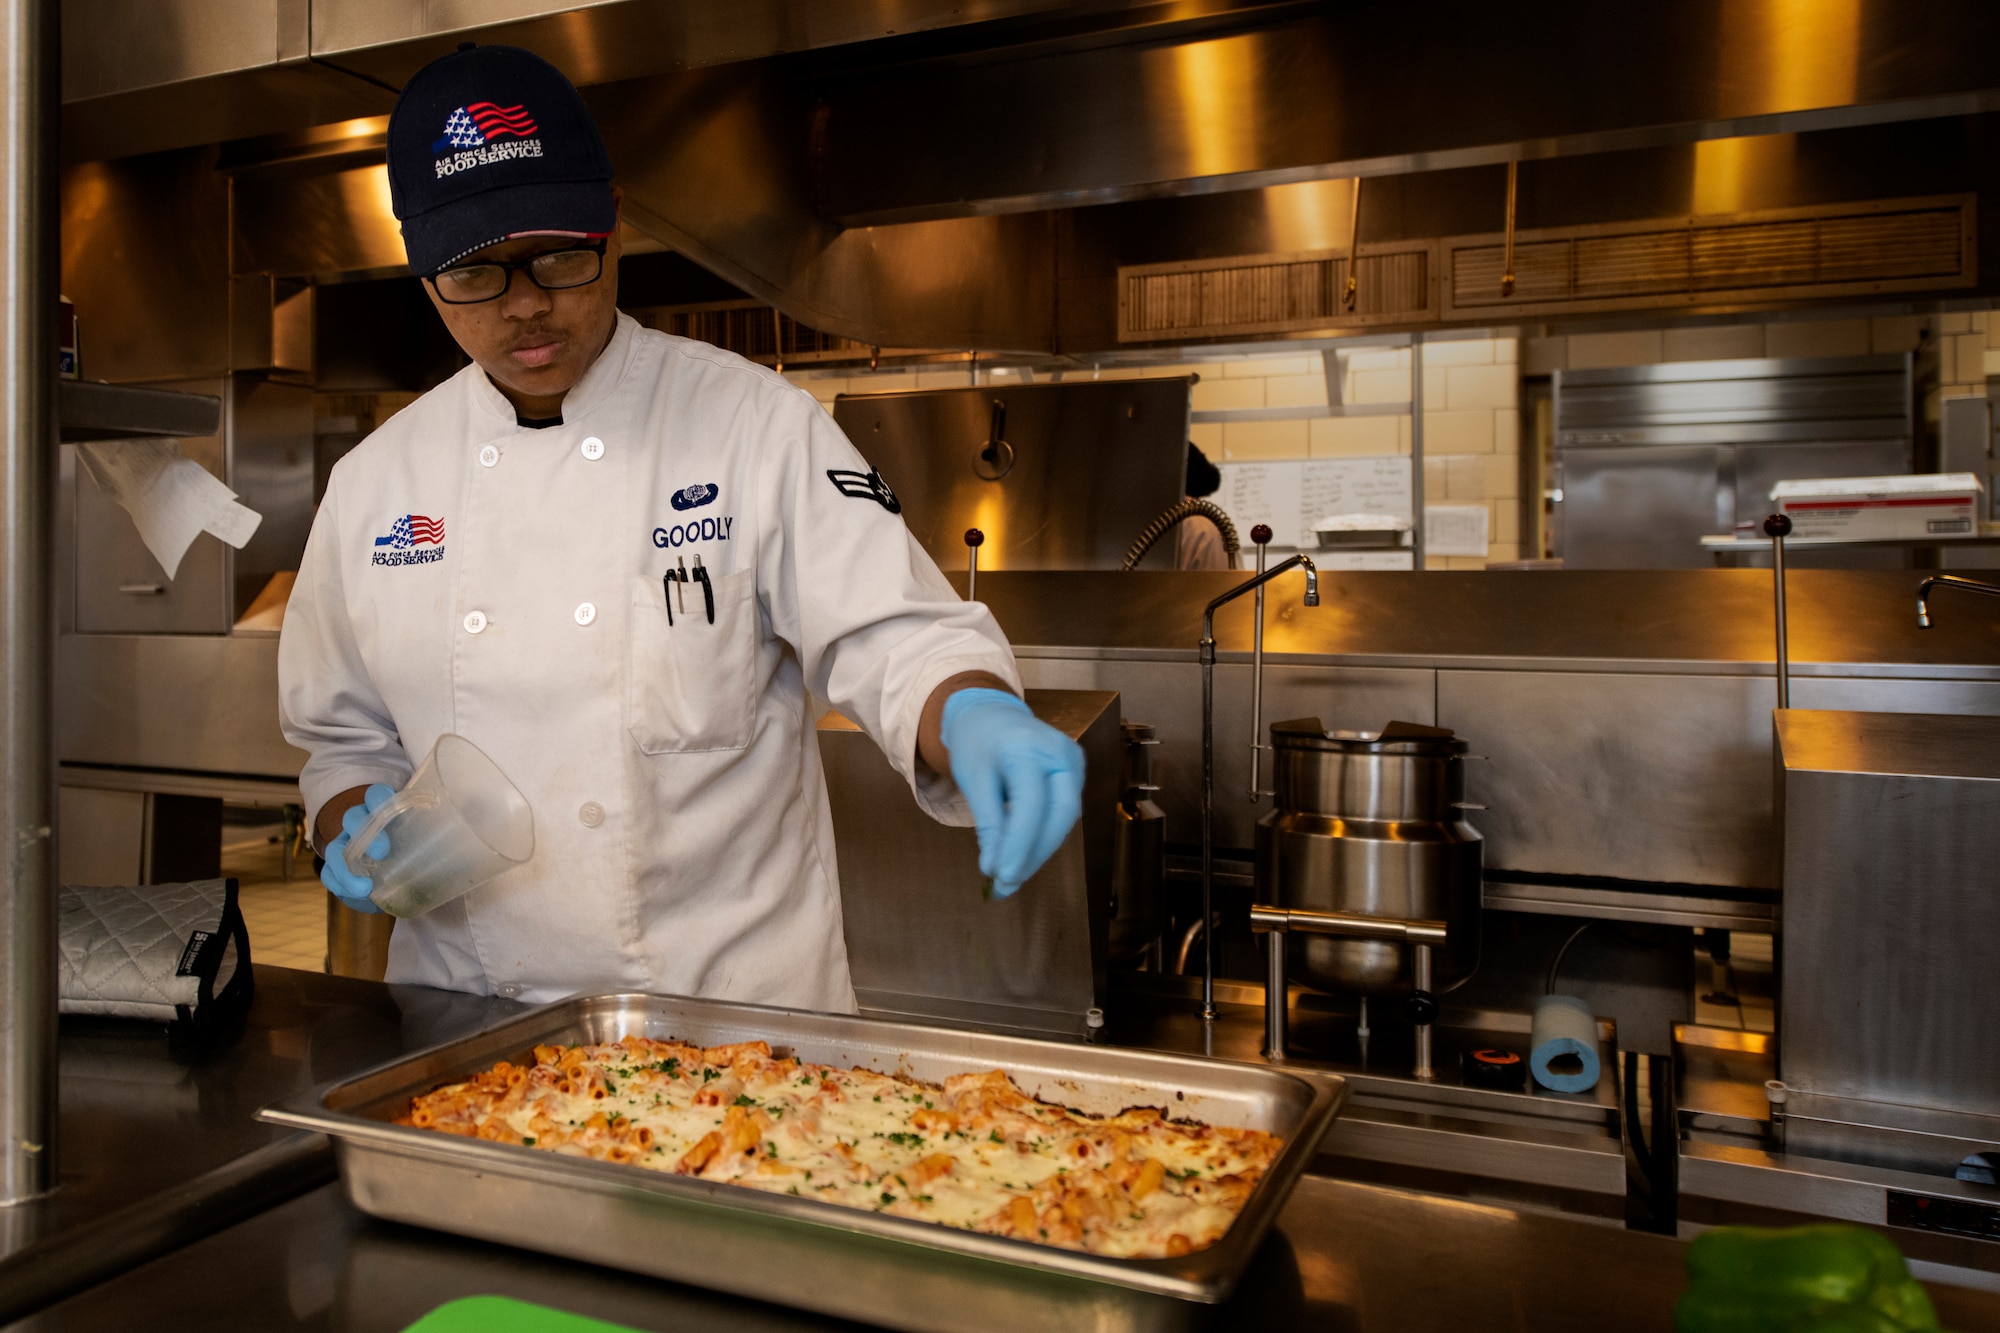 Airman 1st Class Joy Goodly, food services specialist assigned to the 97th Force Support Squadron Hangar 97 Dining Facility, prepares a pasta dish, Jan. 10, 2019 at Altus Air Force Base, Okla.